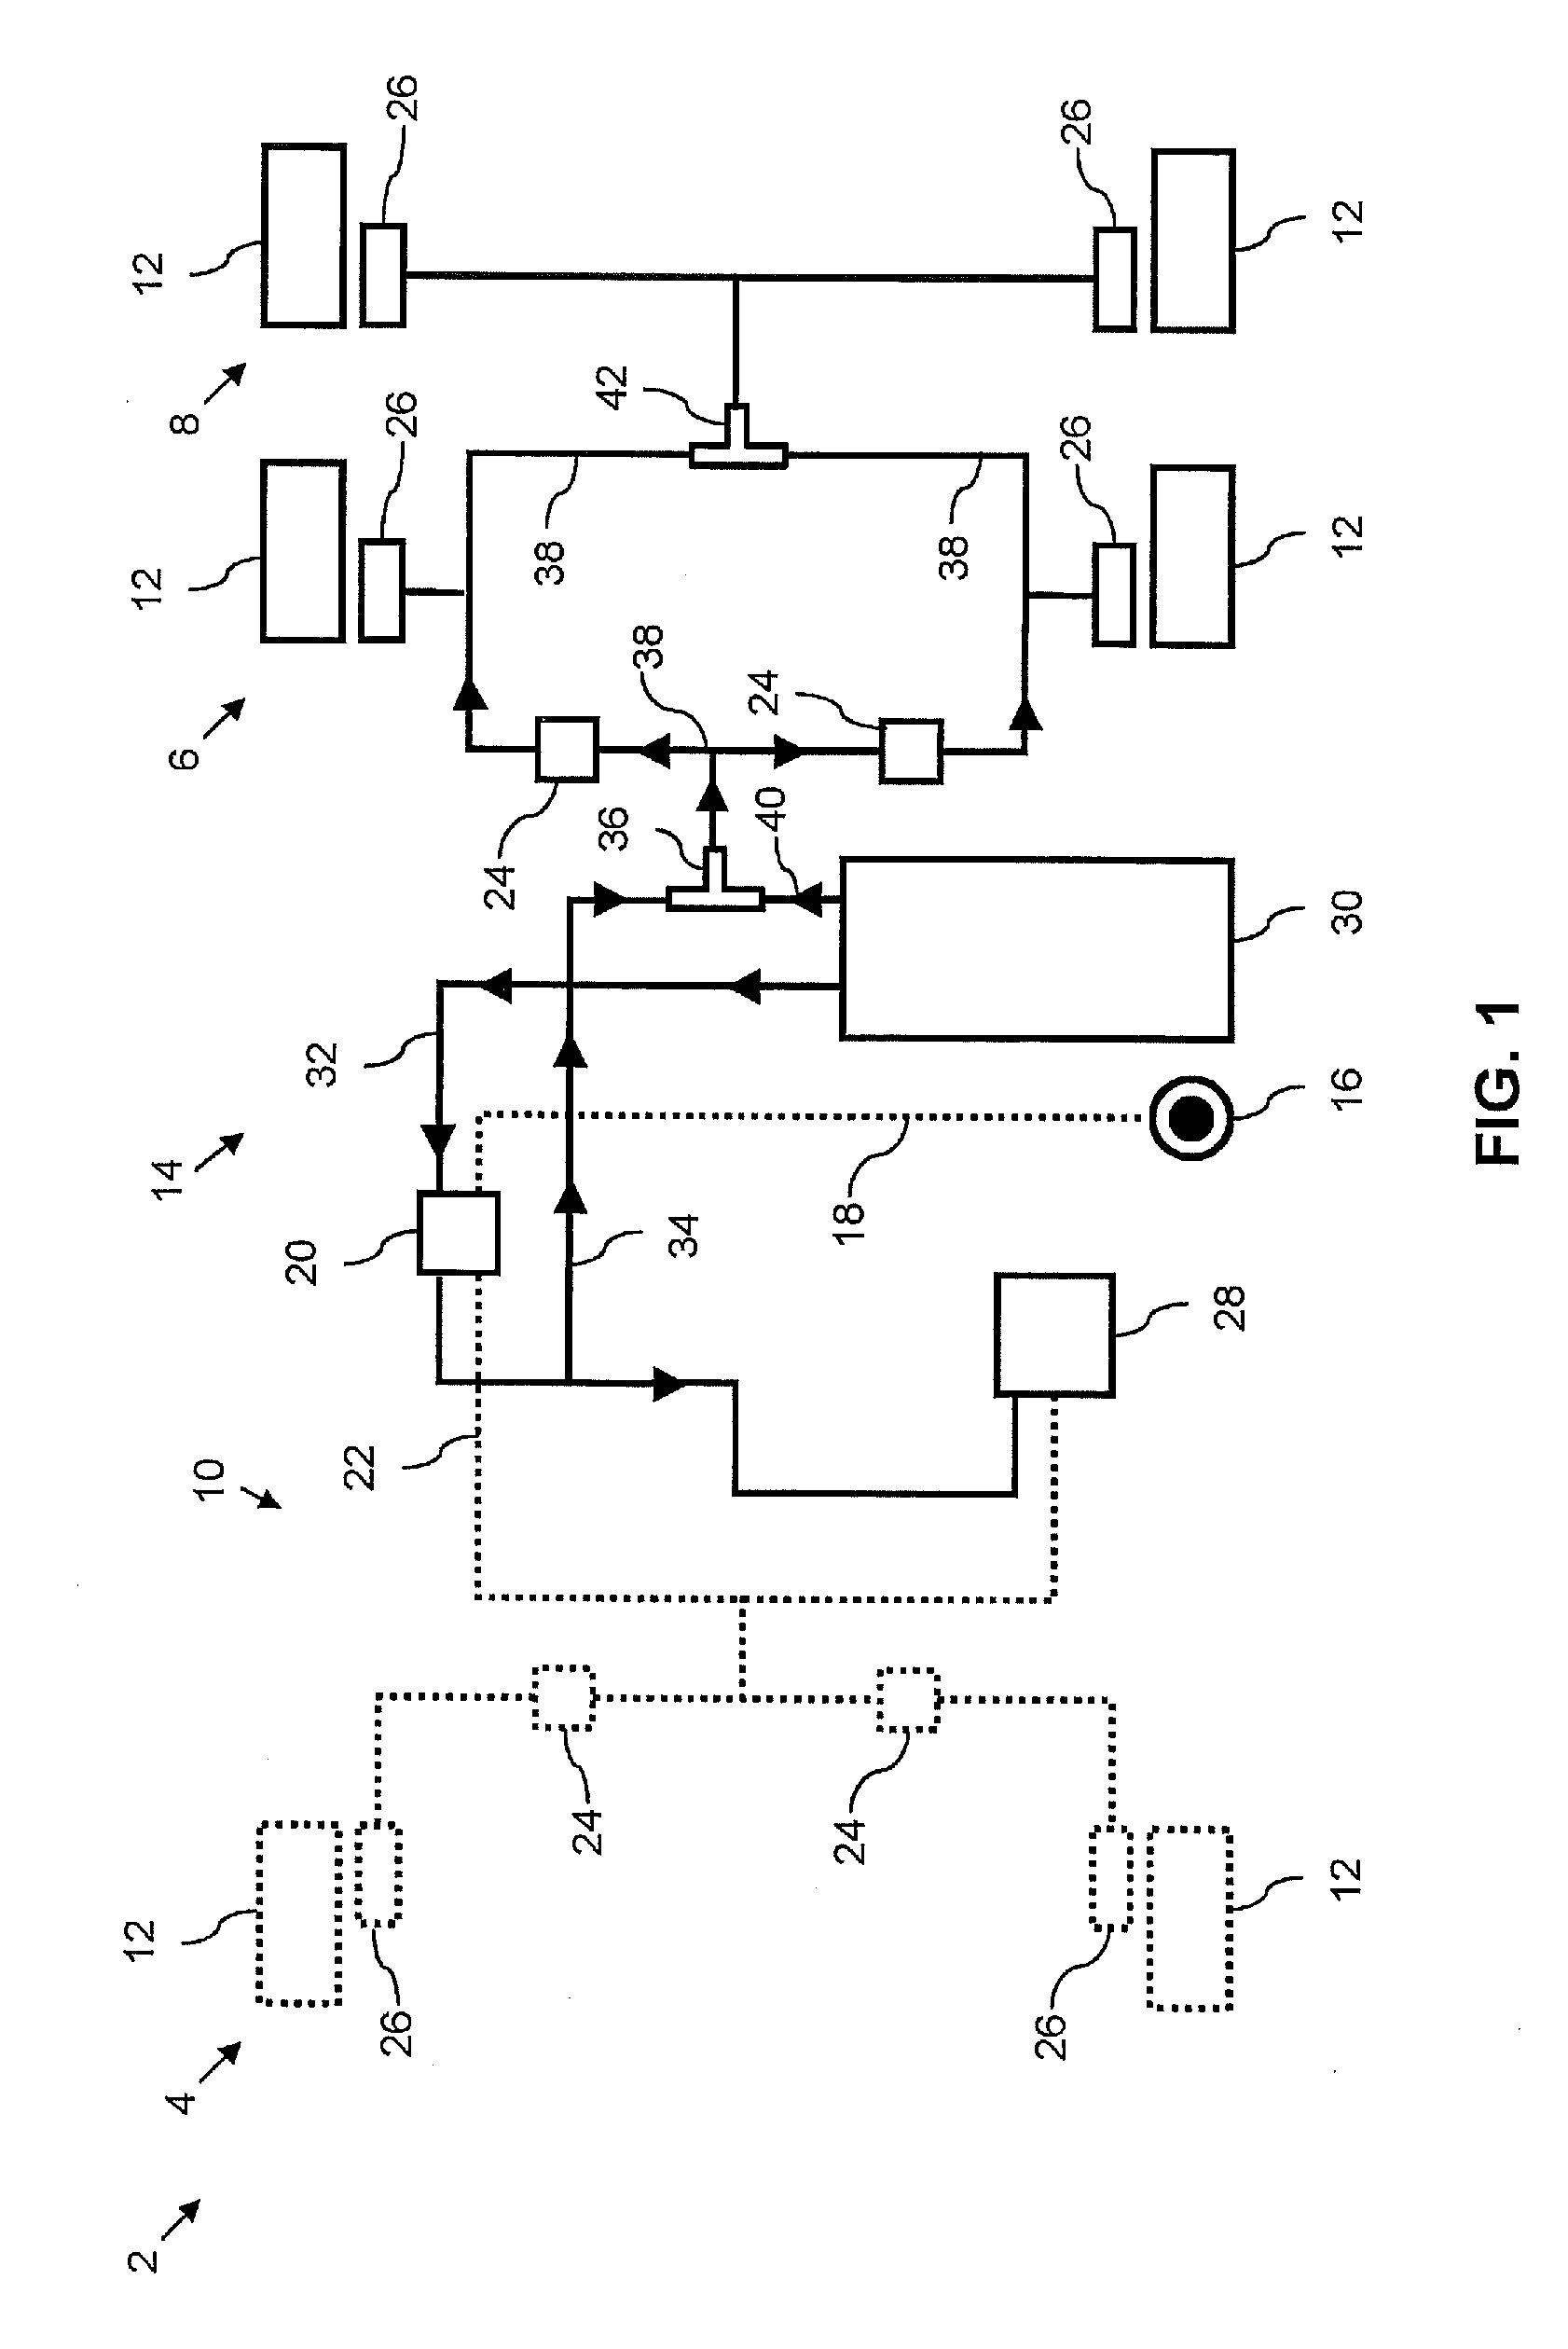 Brake control system for a utility vehicle having a trailer